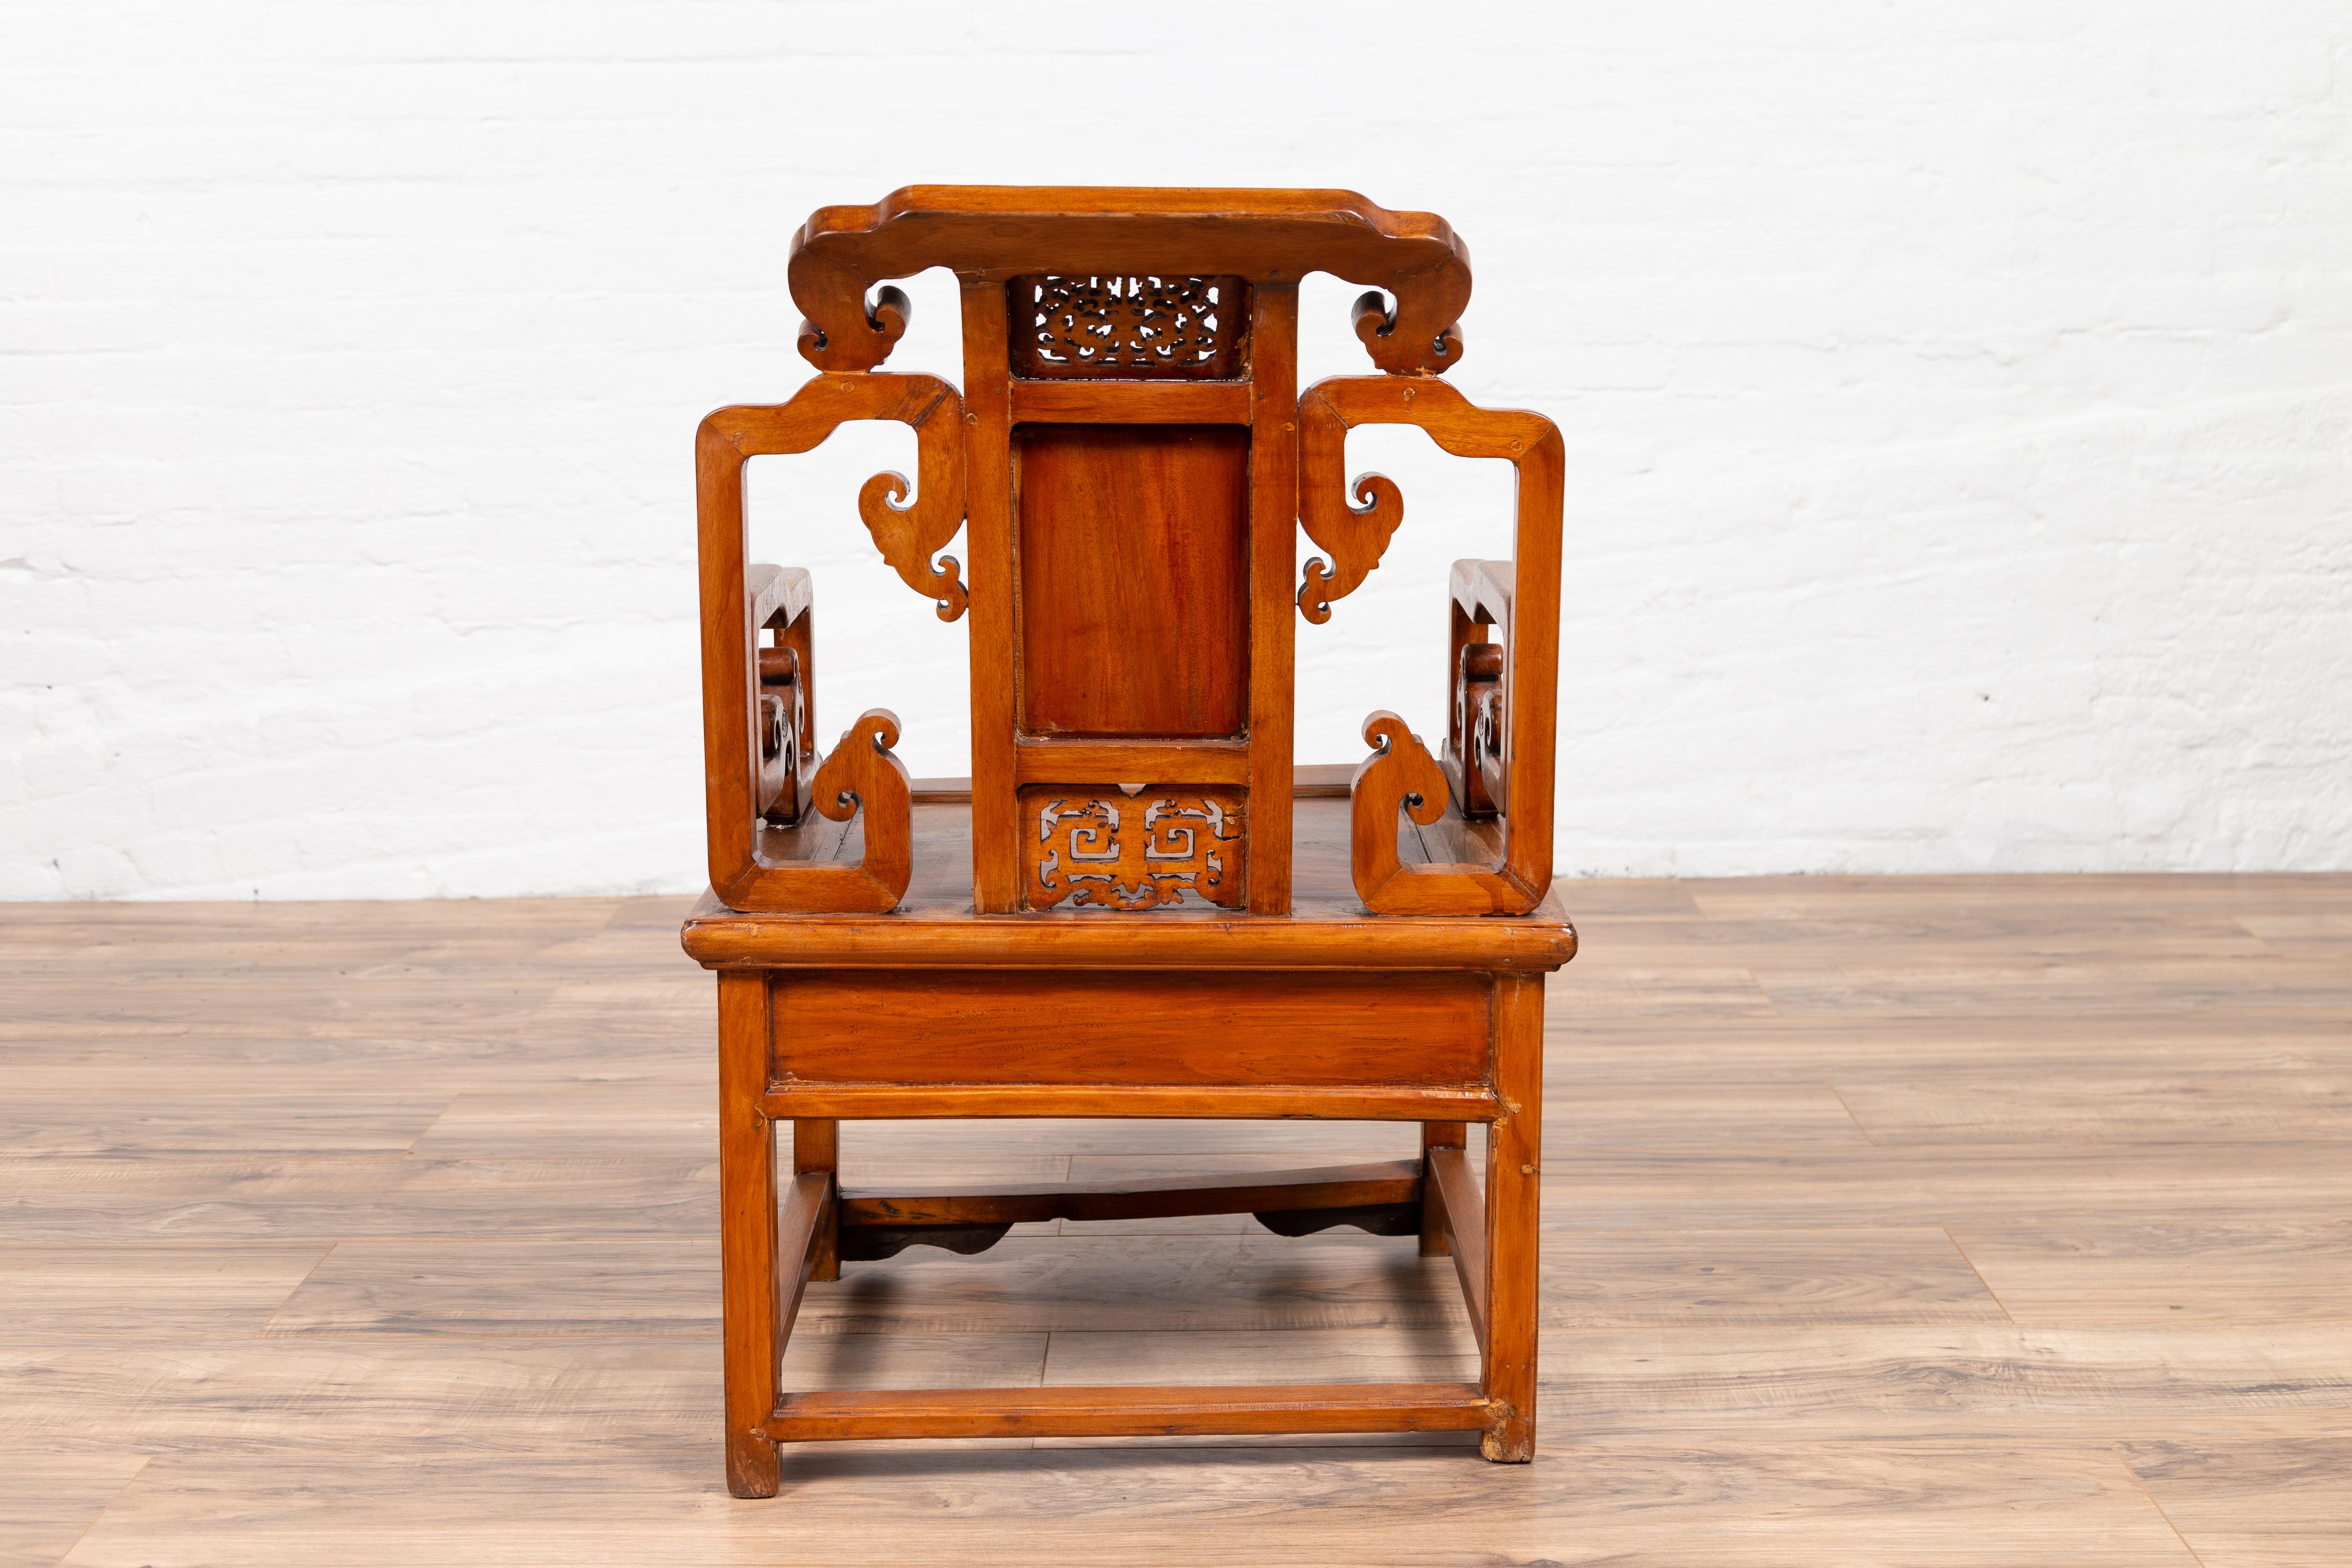 Hand Carved Antique Chinese Chair with Natural Wood Patina and Scroll Décor 7